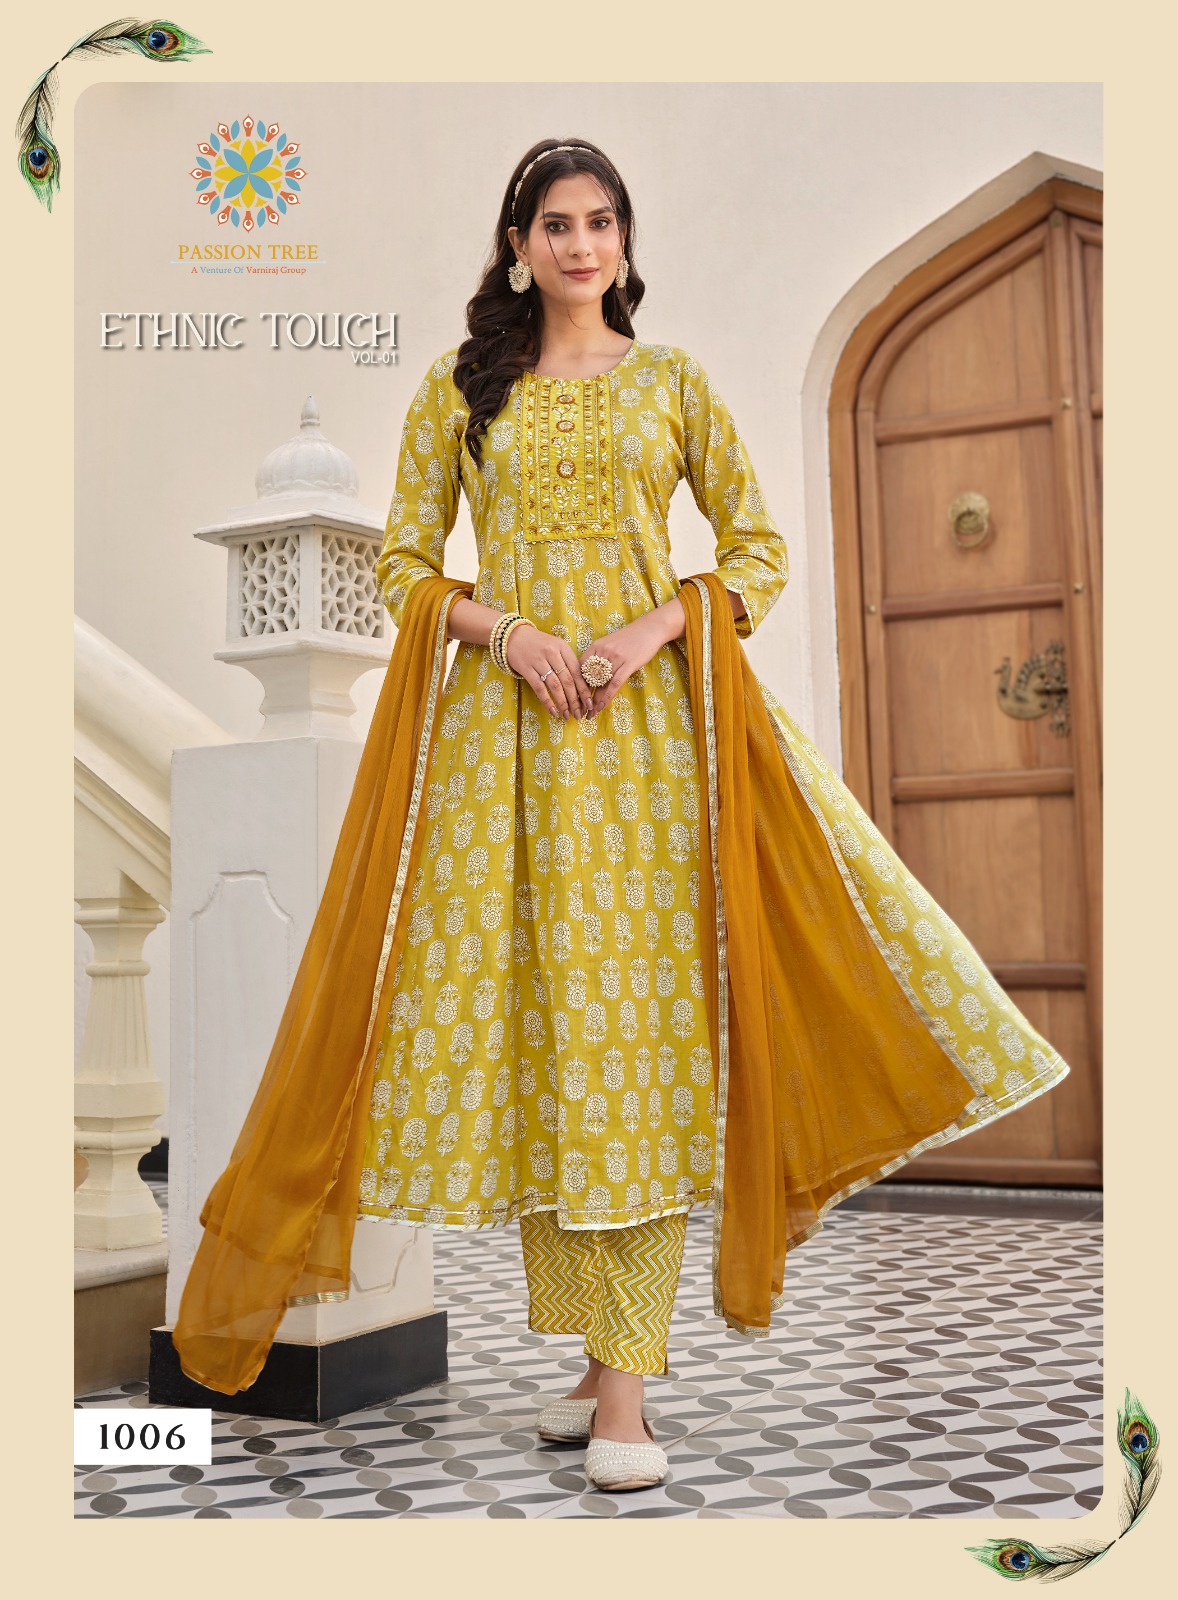 Passion Tree Ethnic Touch Vol 1 collection 6